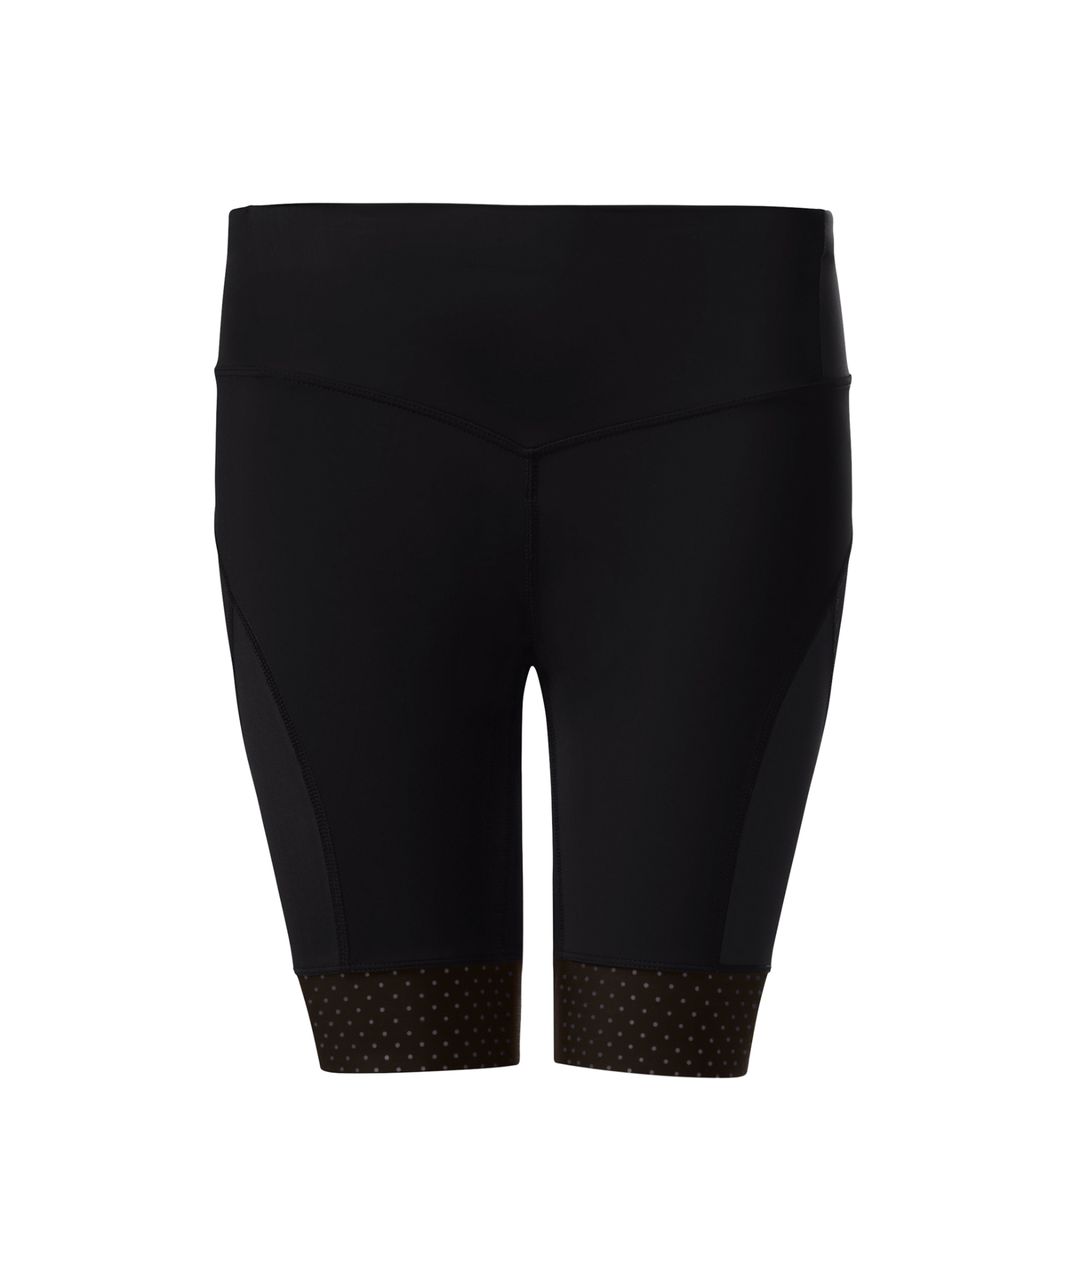 Leader of the pack short lululemon cycling pants, Women's Fashion